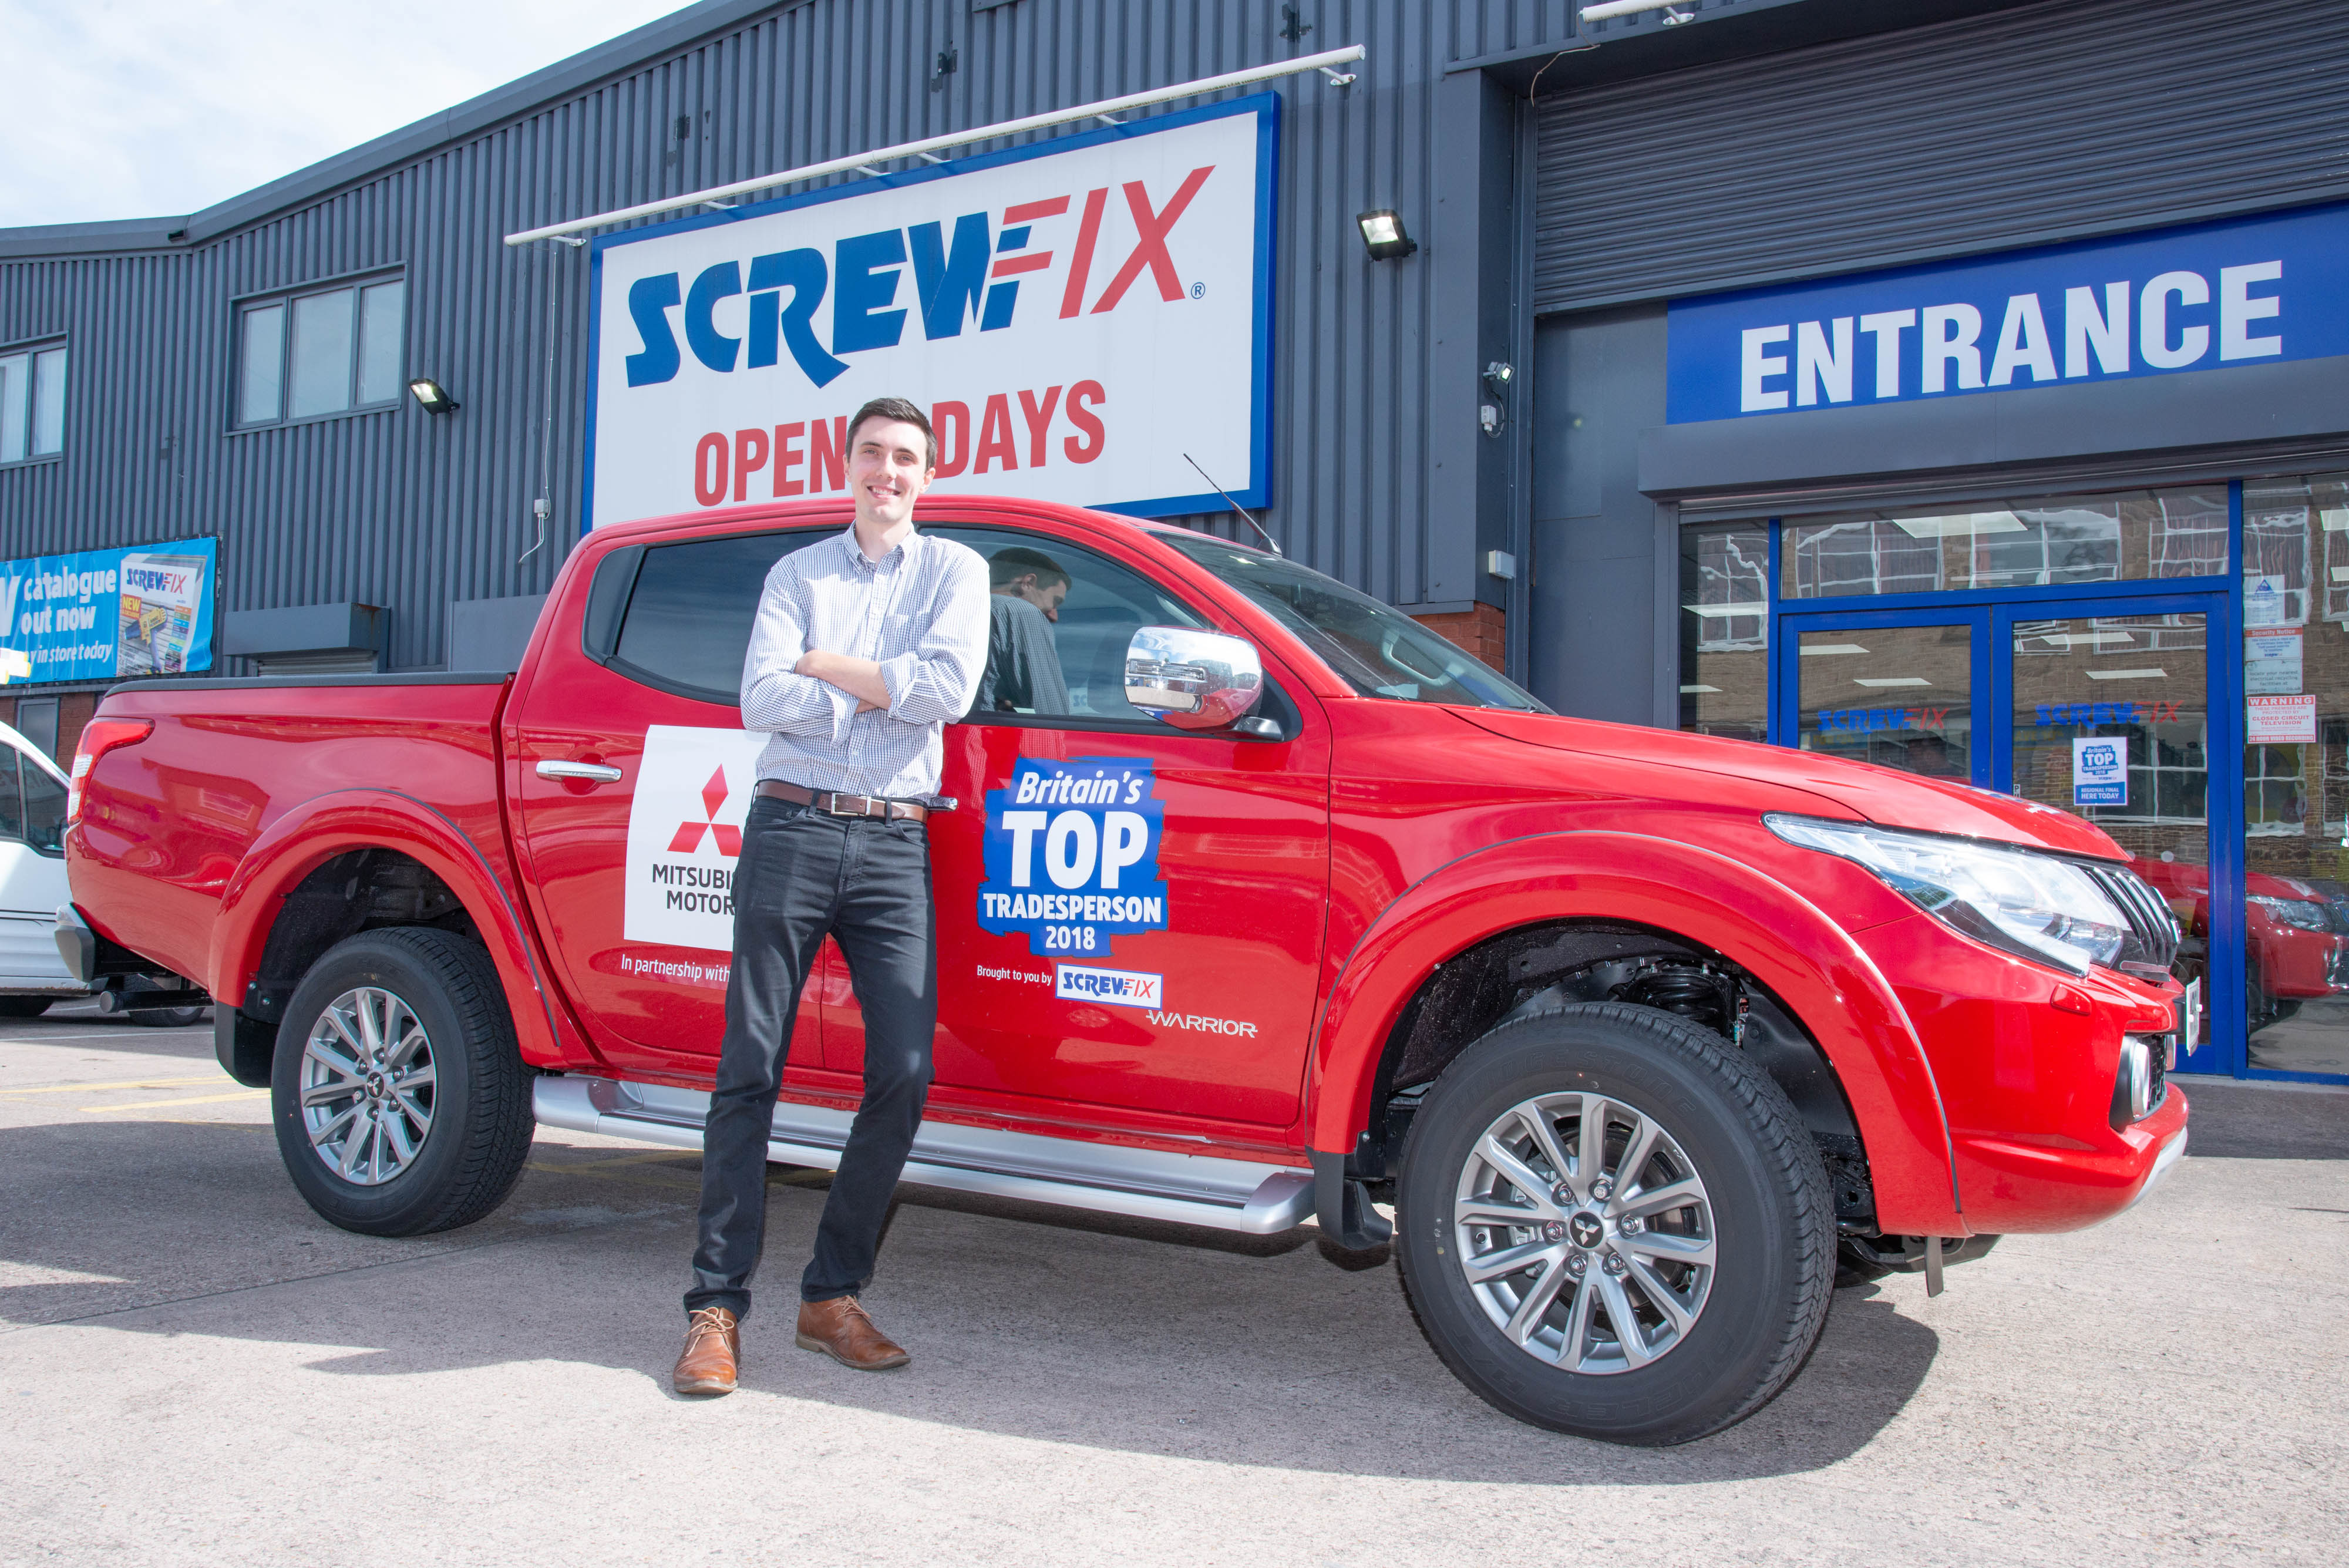 Nuneaton engineer highly commended in Screwfix national competition